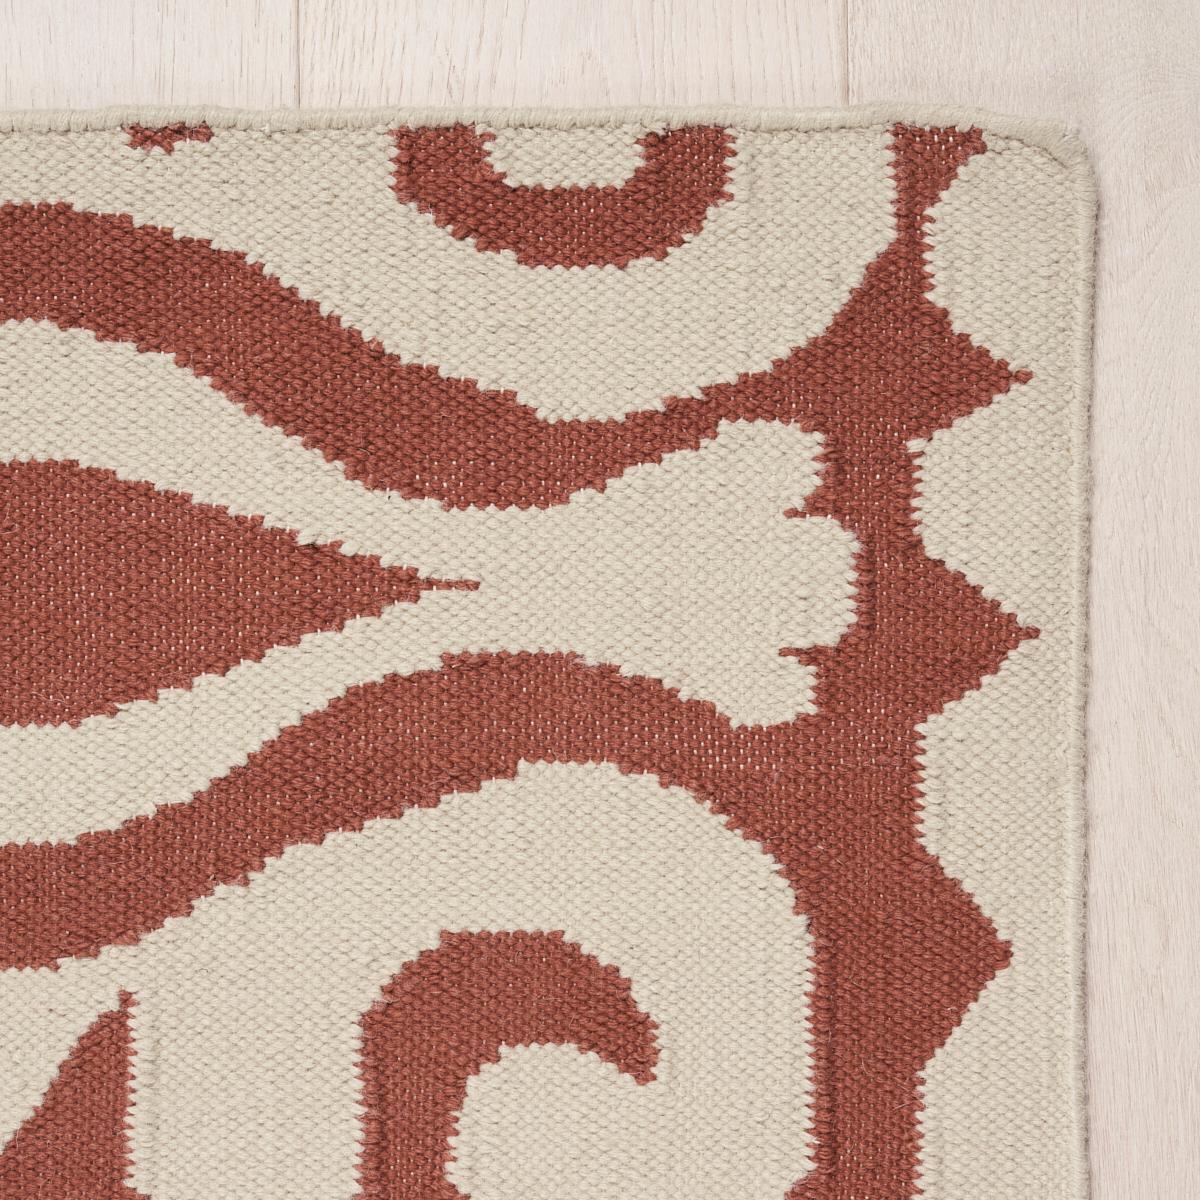 Inspired by Indian motifs, our Seema Indoor/Outdoor Rug is a stylish combination of geometric and abstract elements. Made of 100% recycled PET, it looks and feels like natural fibers, plus it stands up beautifully to foot and paw traffic, indoors